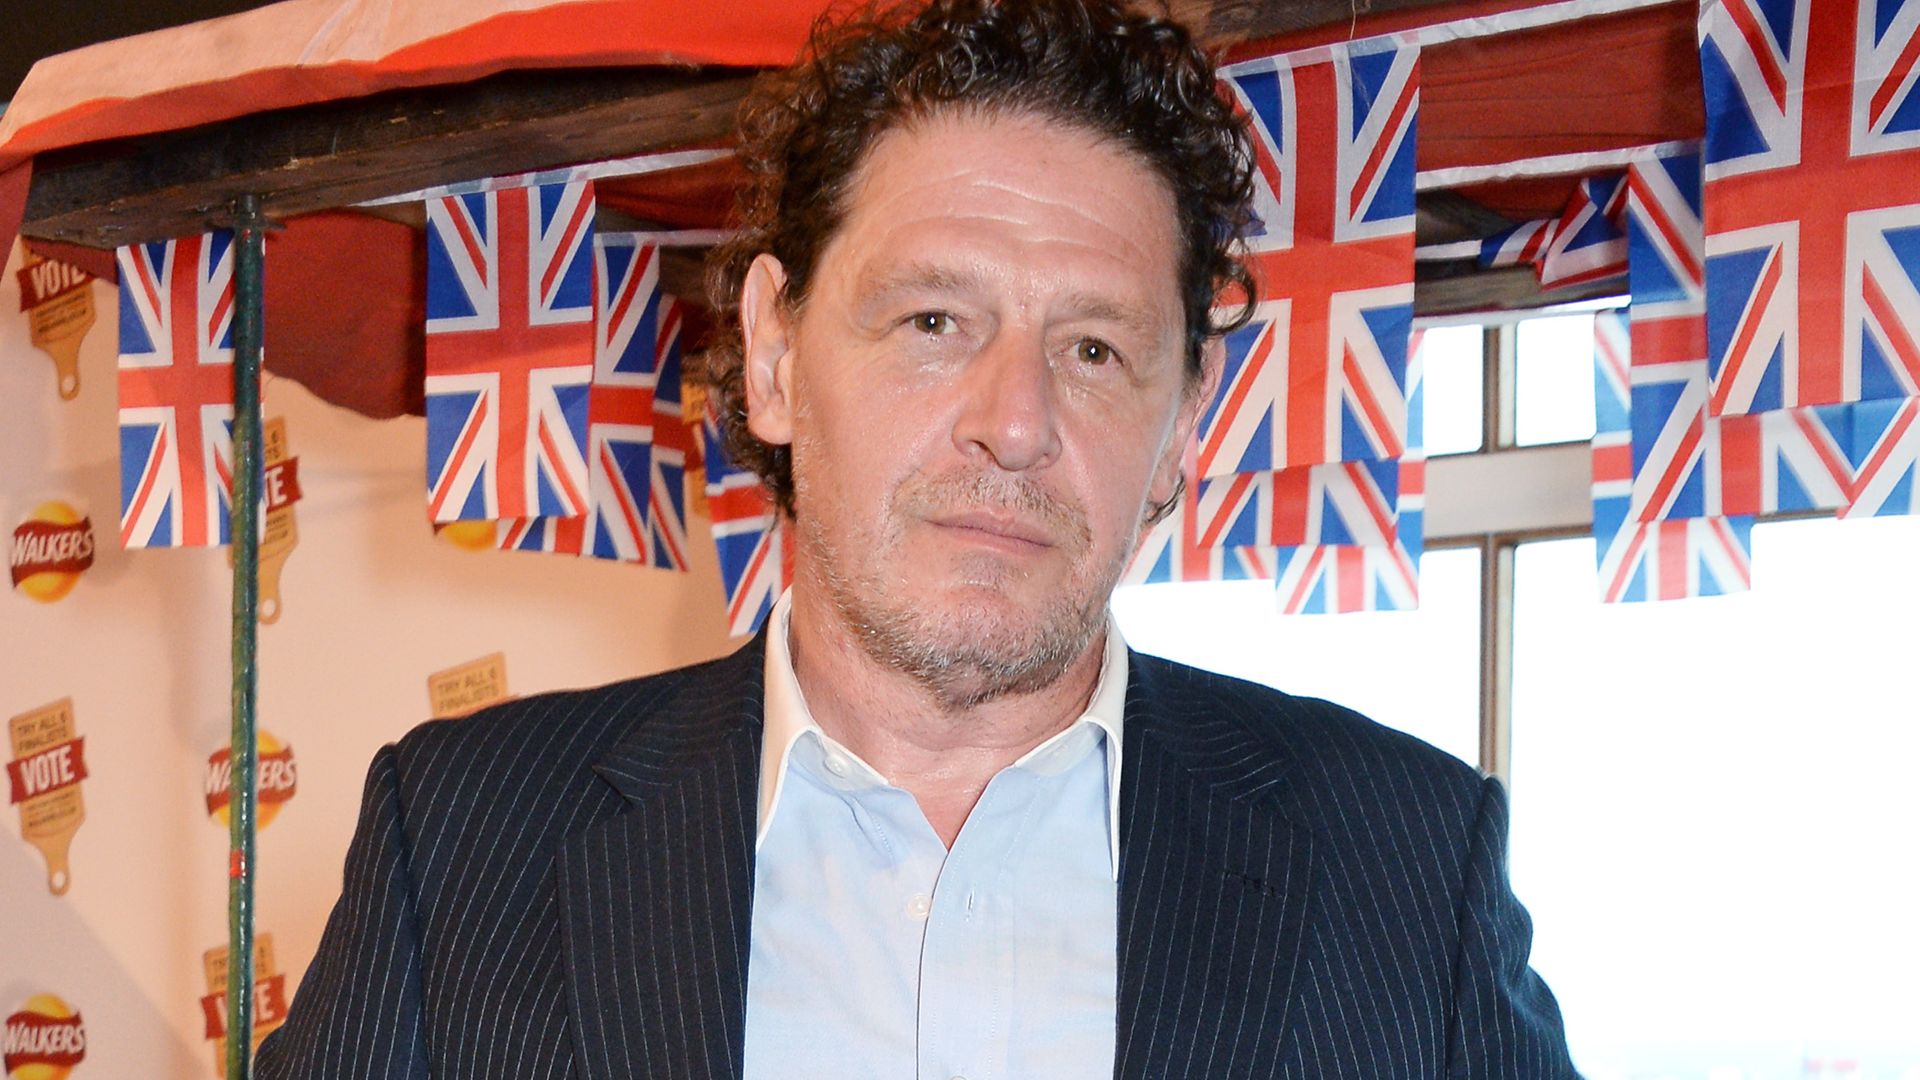 Marco Pierre White stood for a photo